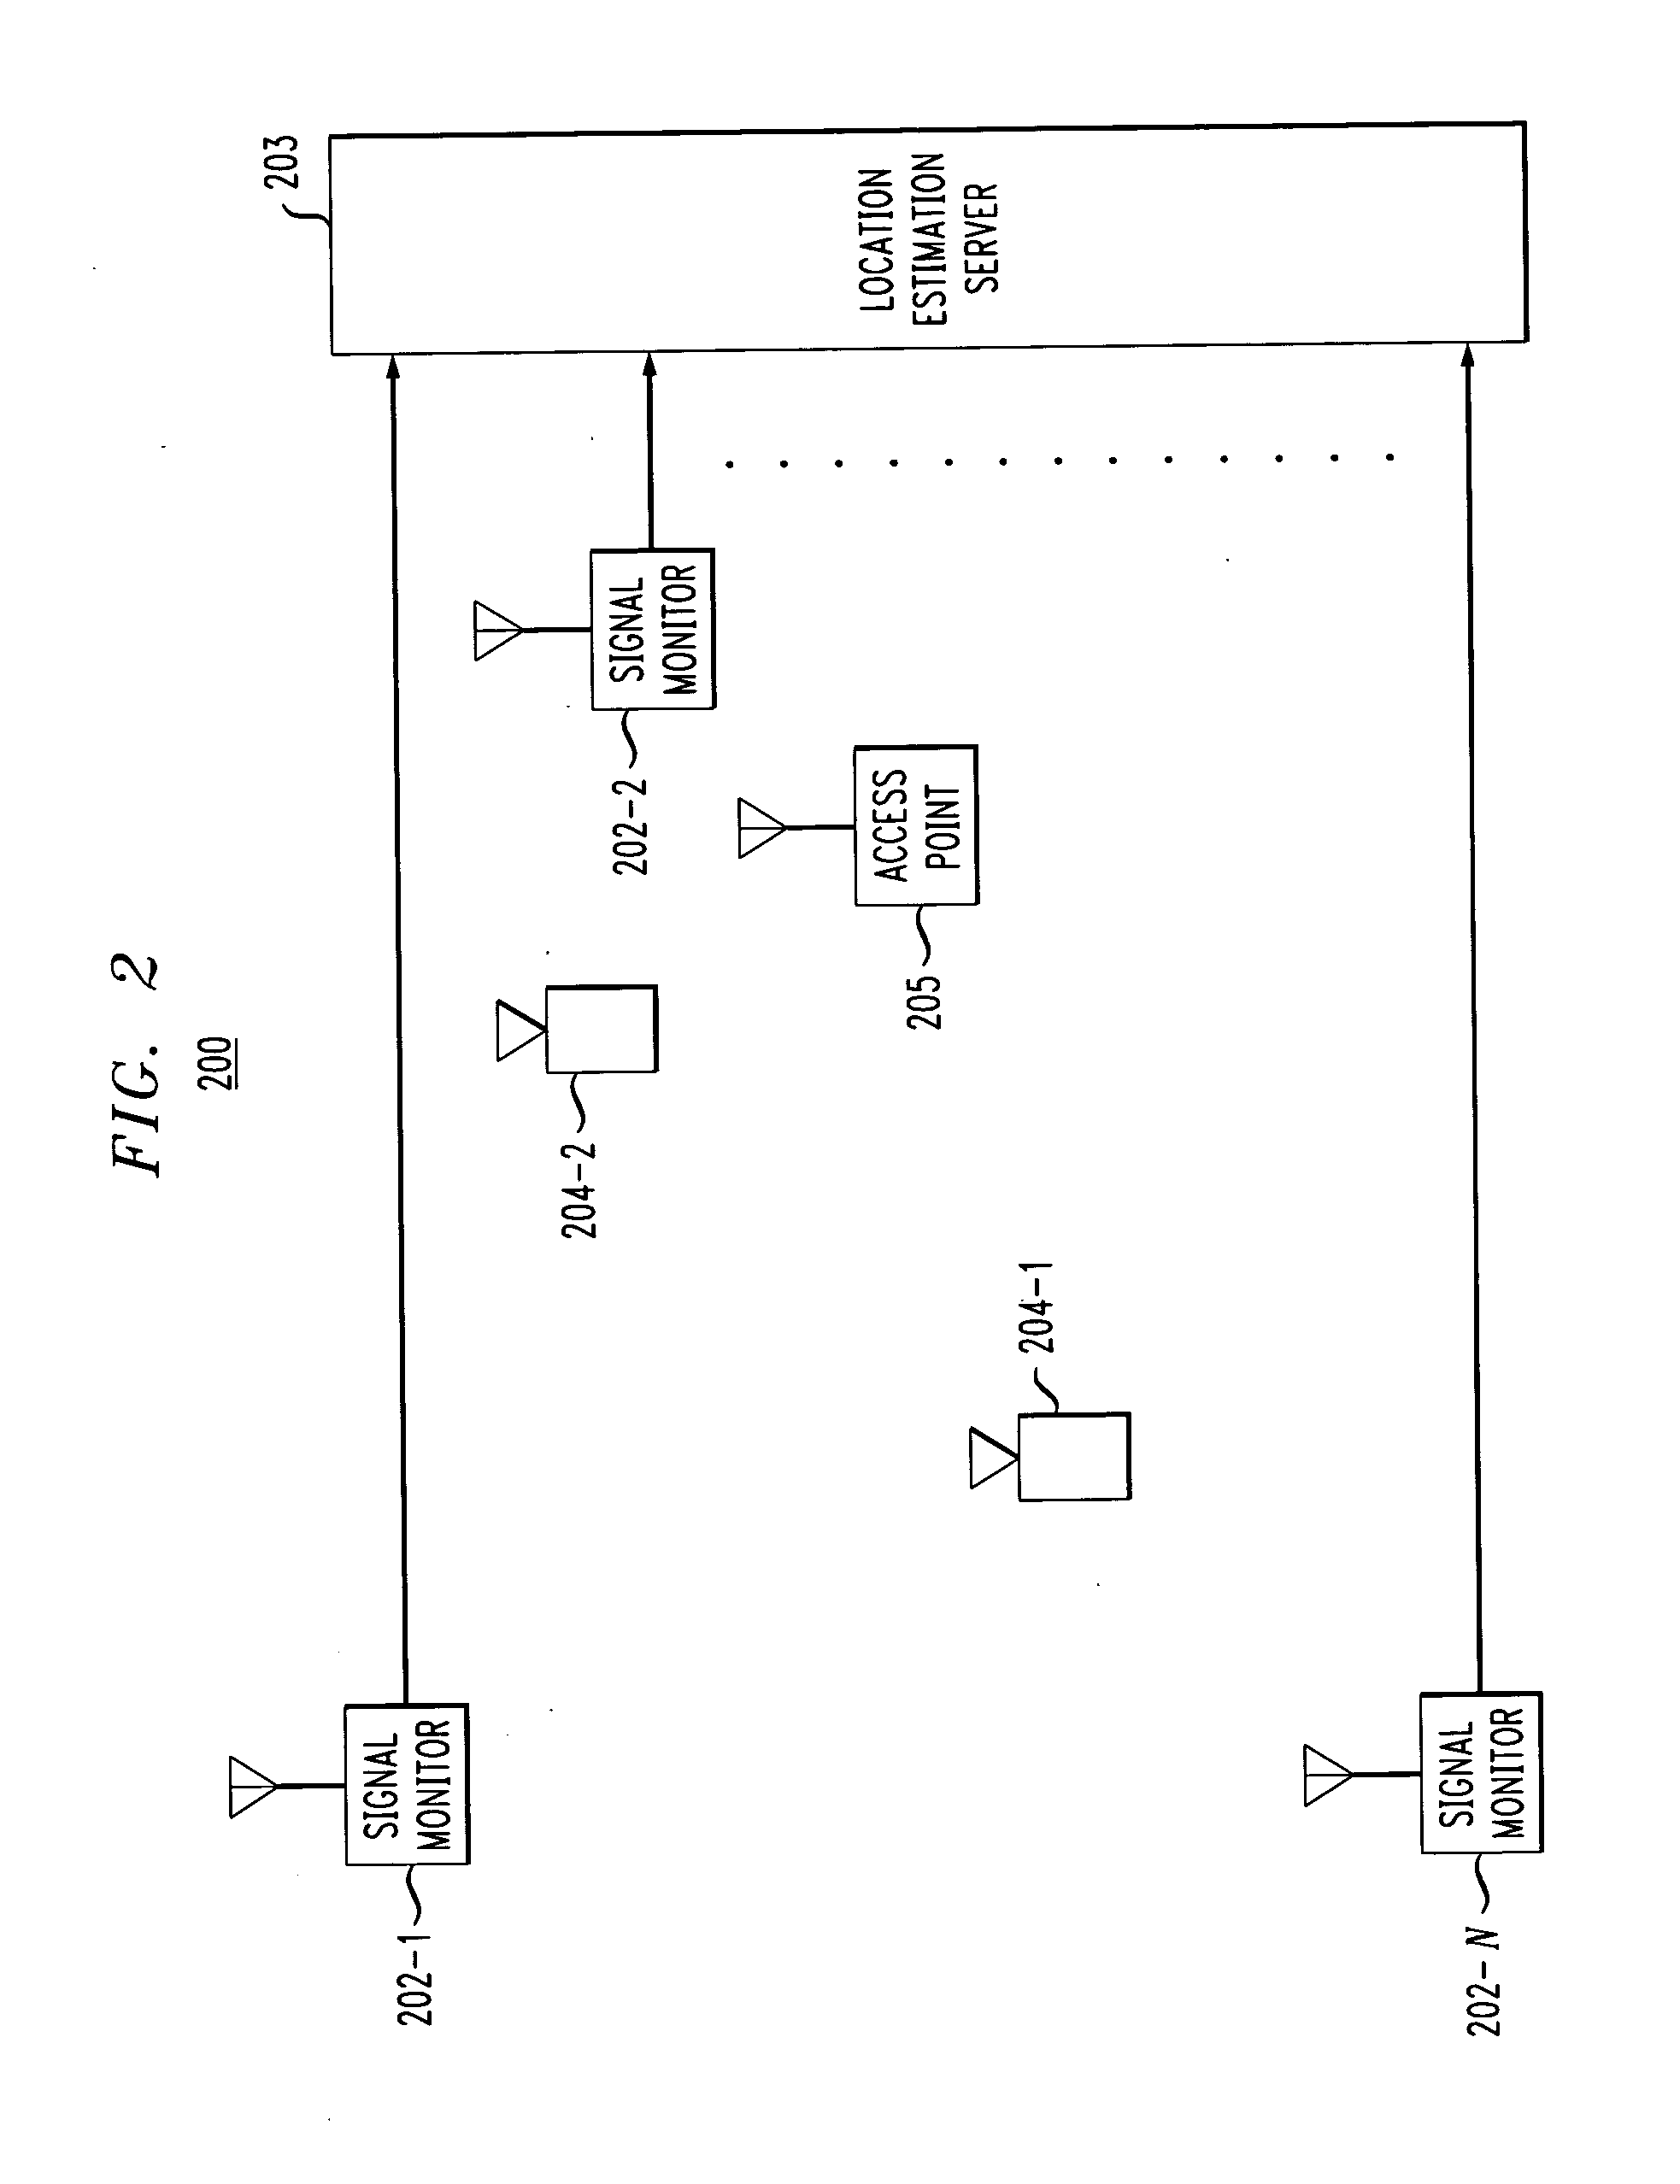 Method and apparatus for positioning a set of terminals in an indoor wireless environment